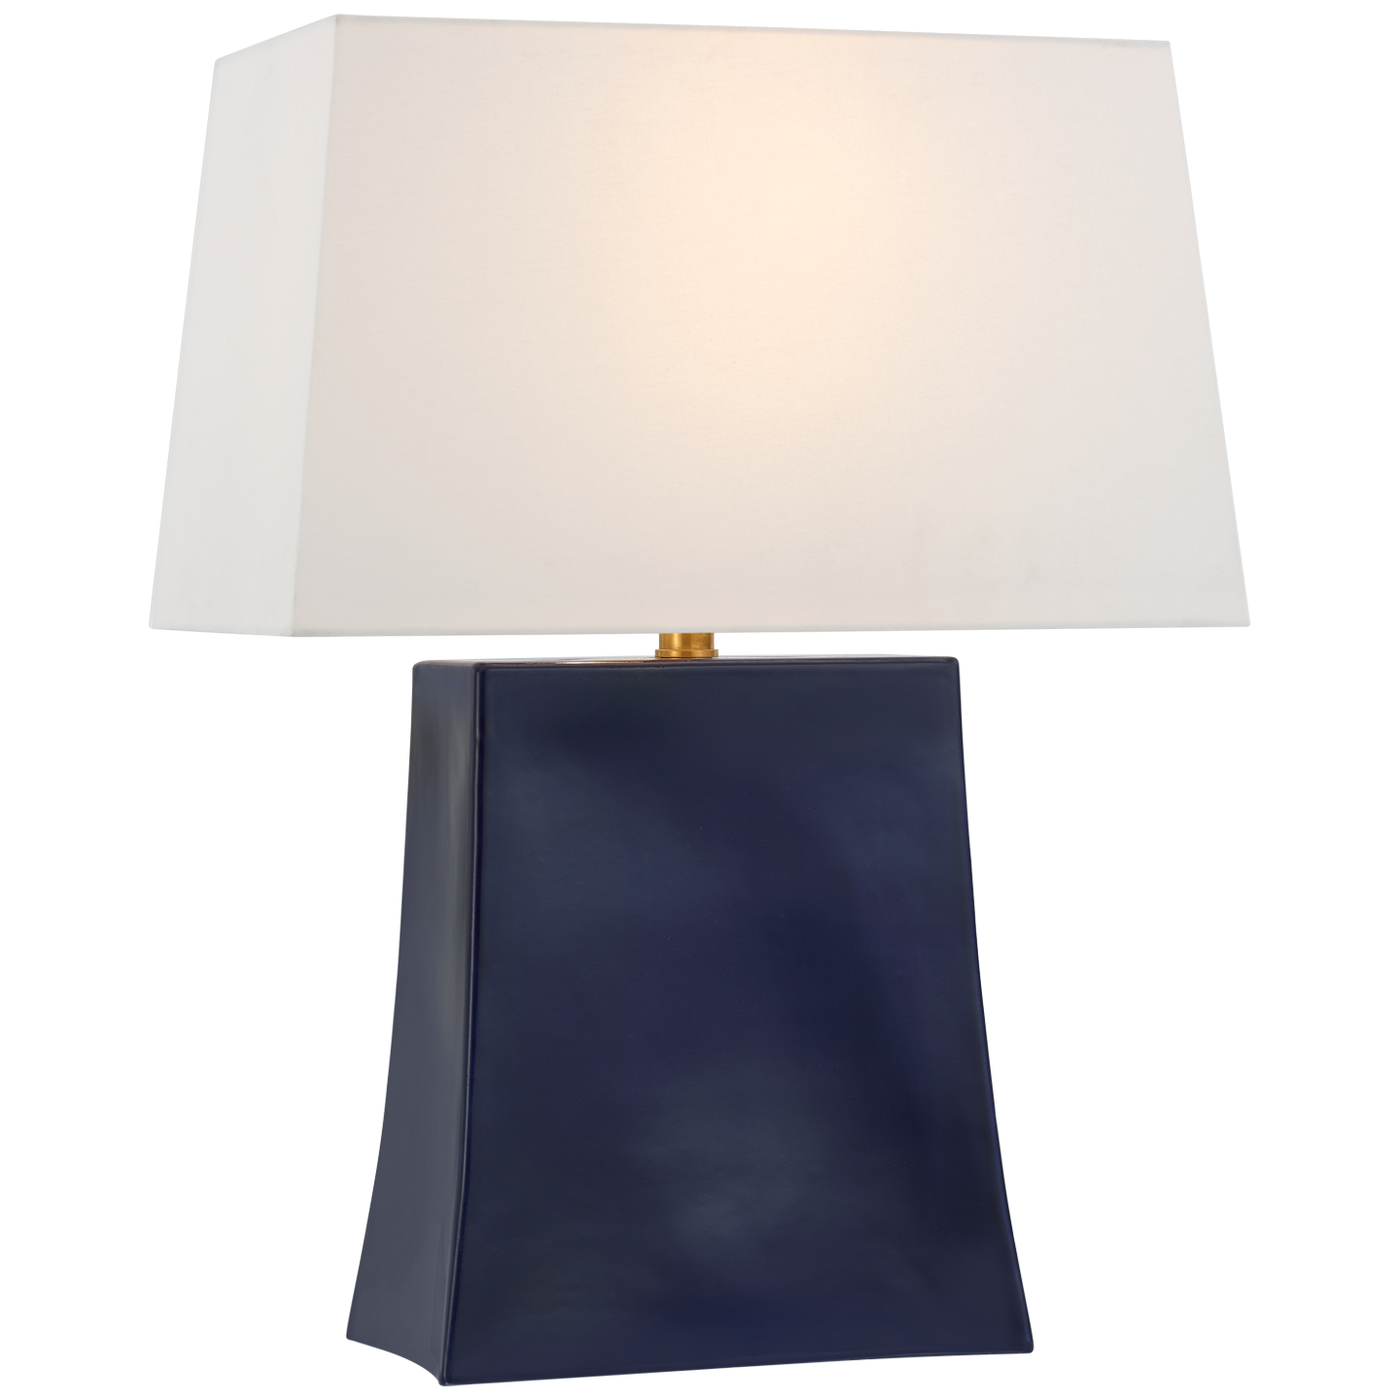 TABLE LAMP RECTANGULAR MEDIUM (Available in 3 Finishes)